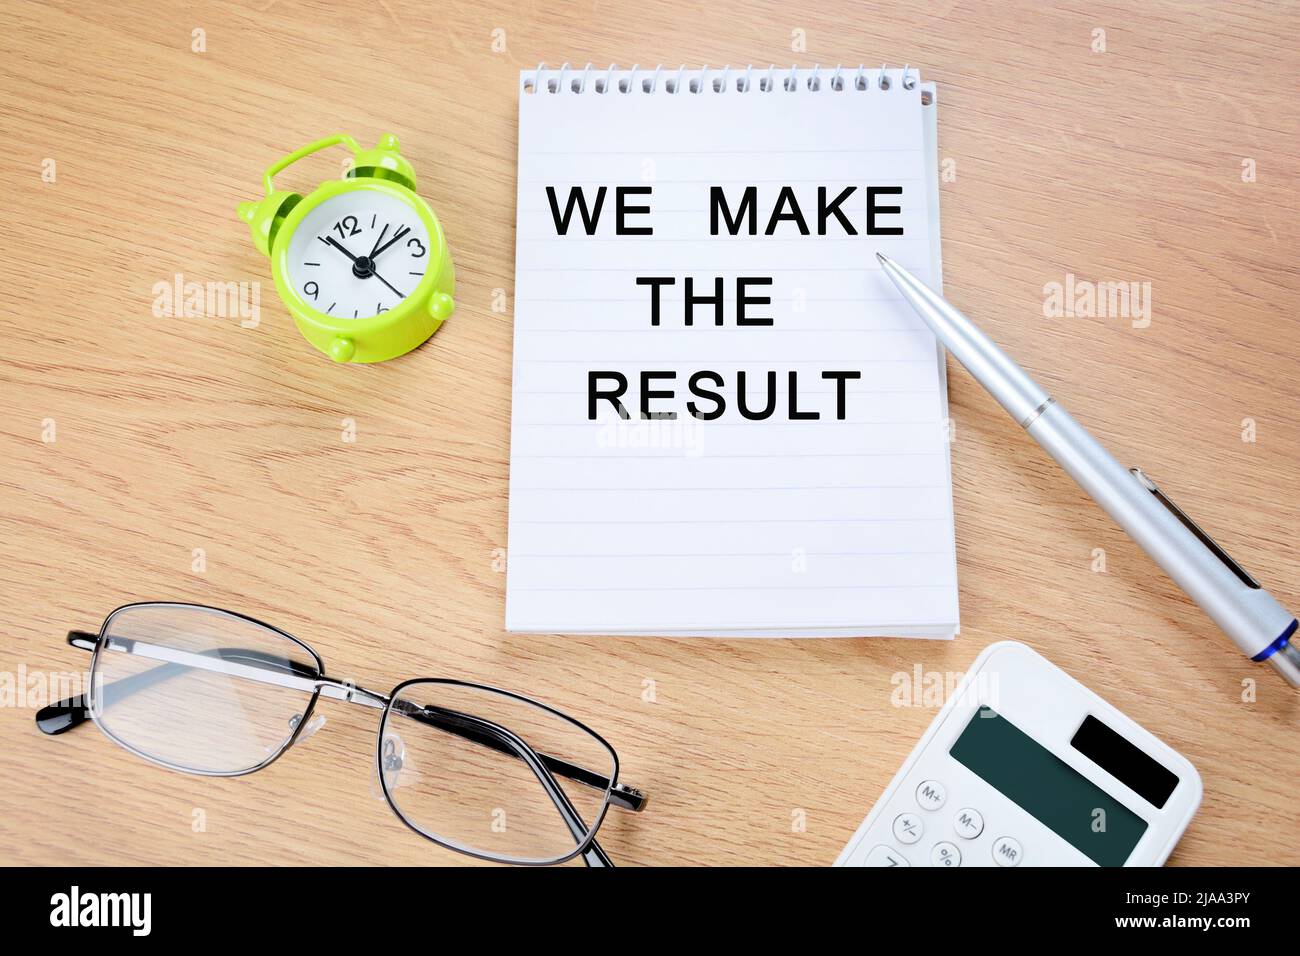 We make the results text on notebook page close up Stock Photo